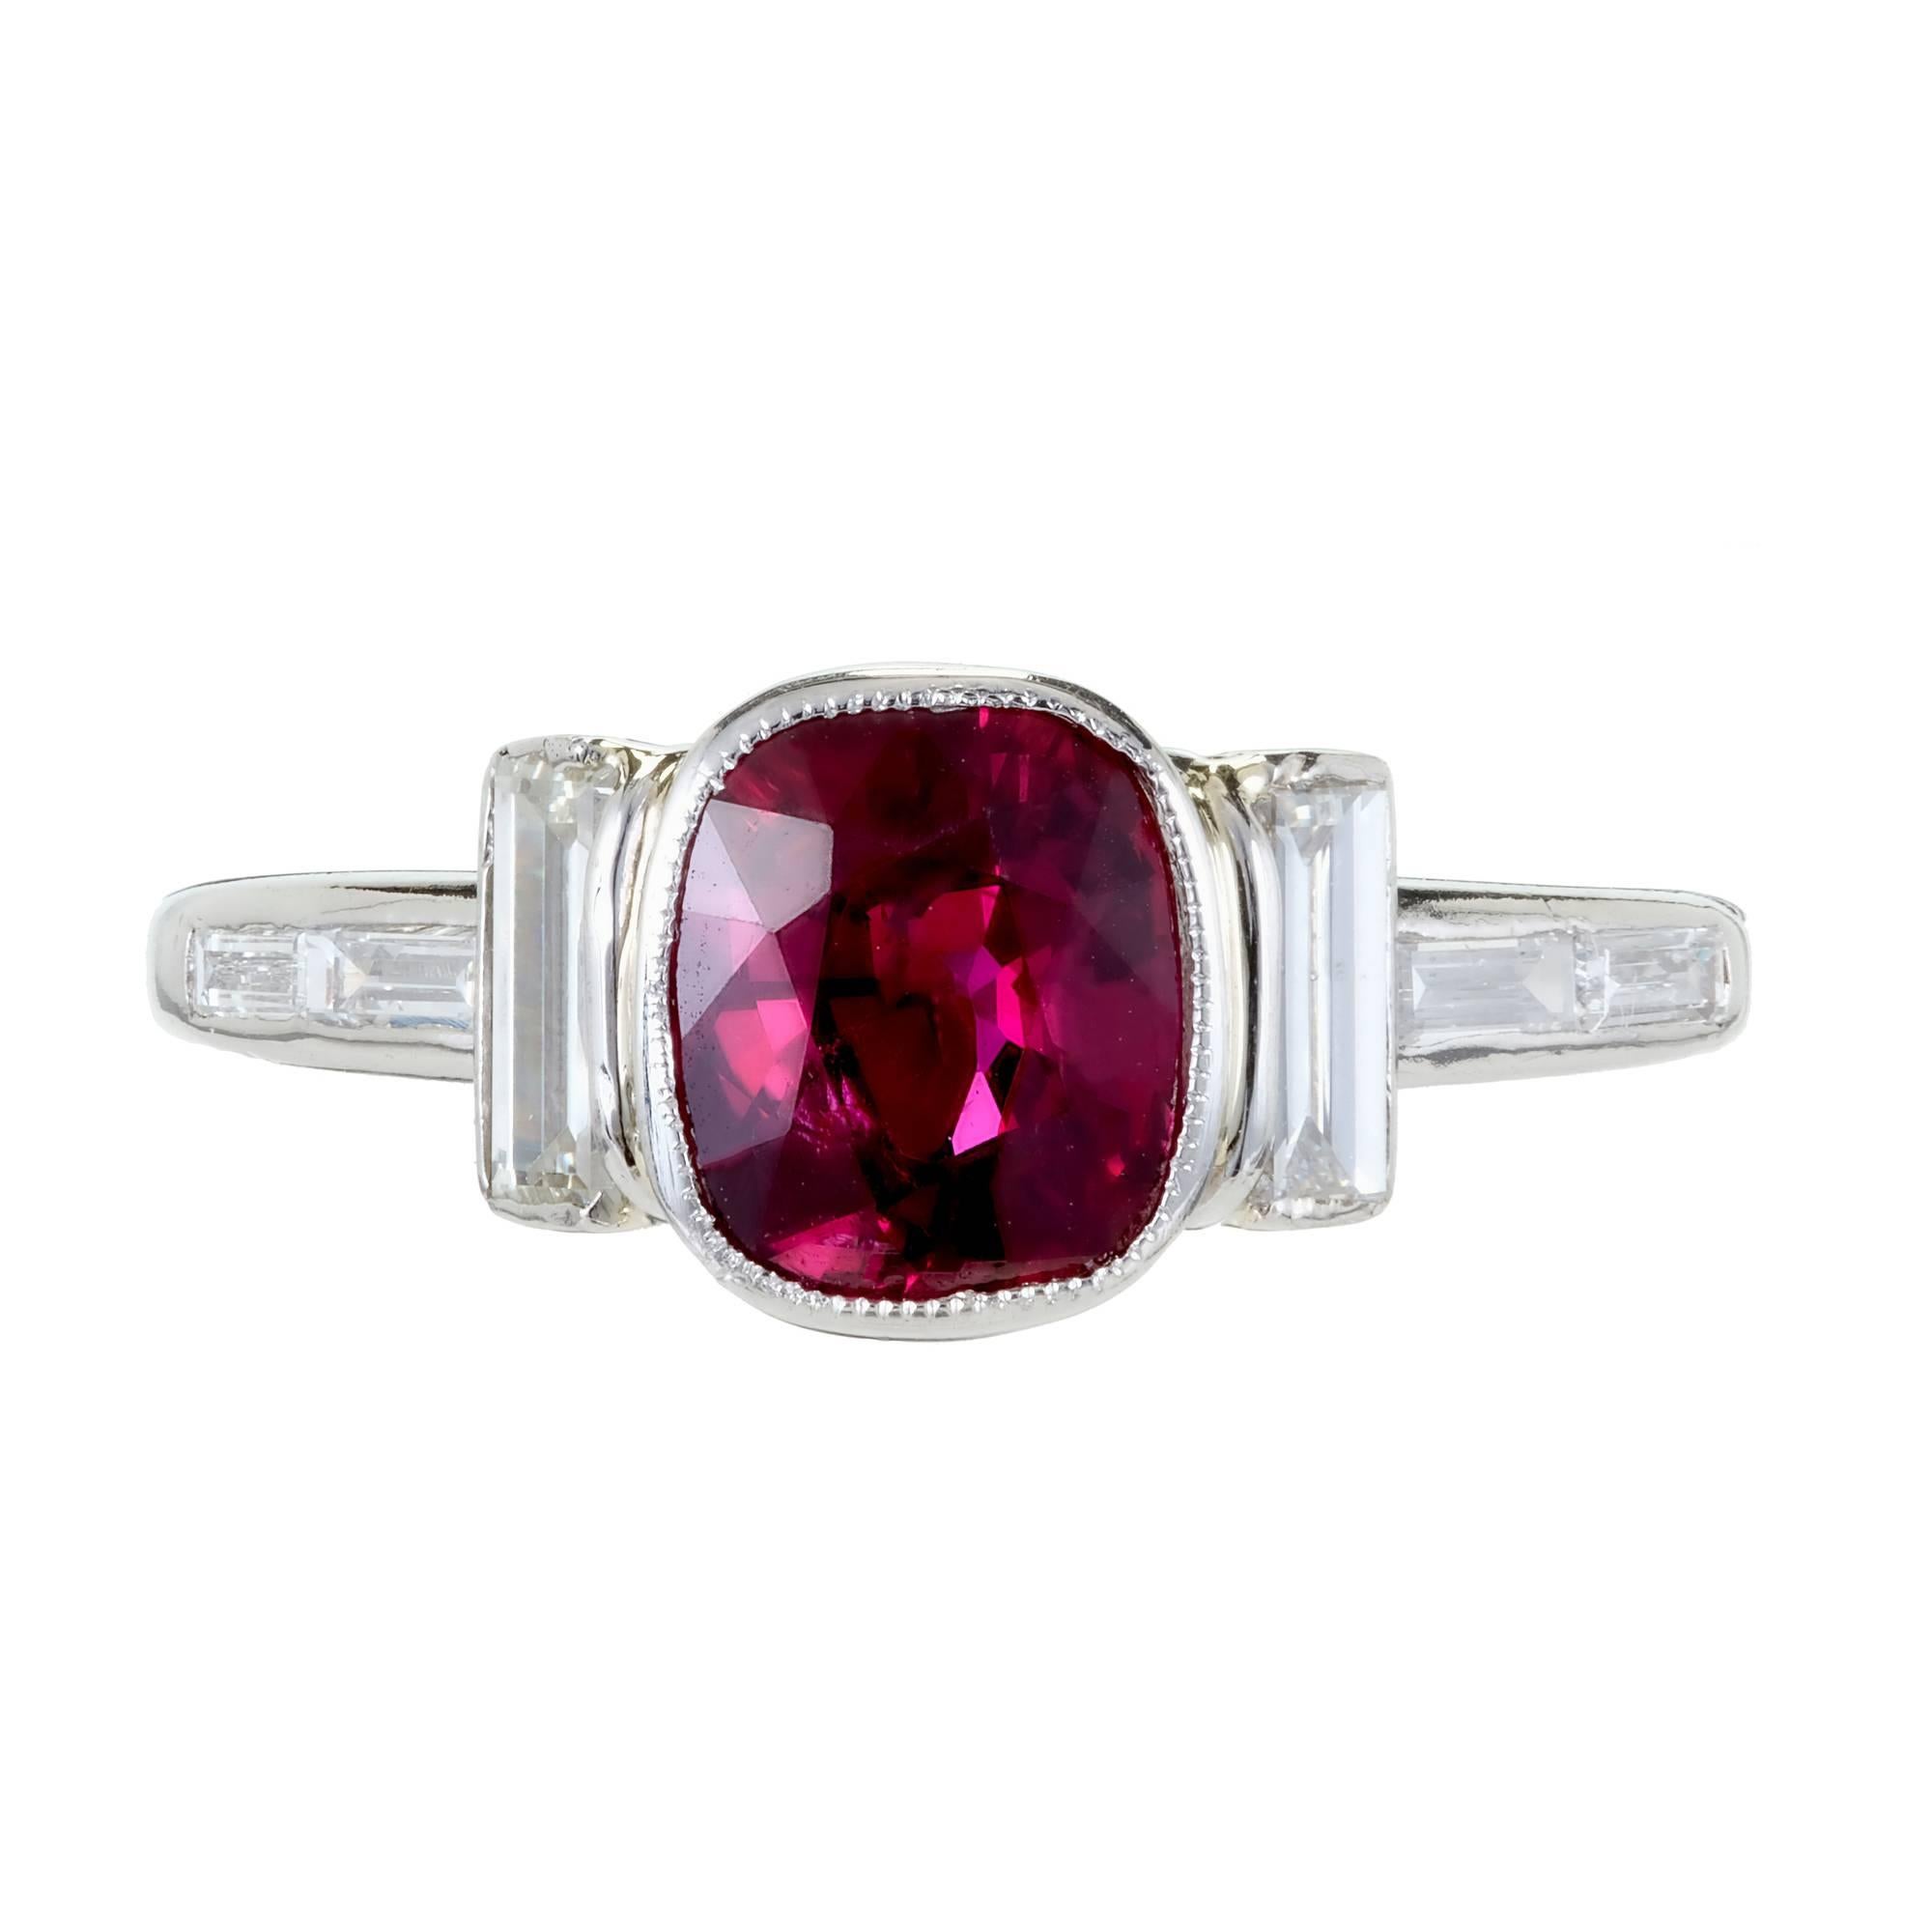 Art Deco cushion cut Ruby and white diamond engagement ring, with baguette accents in a platinum setting. GIA certified. 

1 antique cushion cut gem red Ruby, approx. total weight 1.66cts, SI, 7.50 x 6.12 x 4.18mm, GIA certificate #2165056540
6